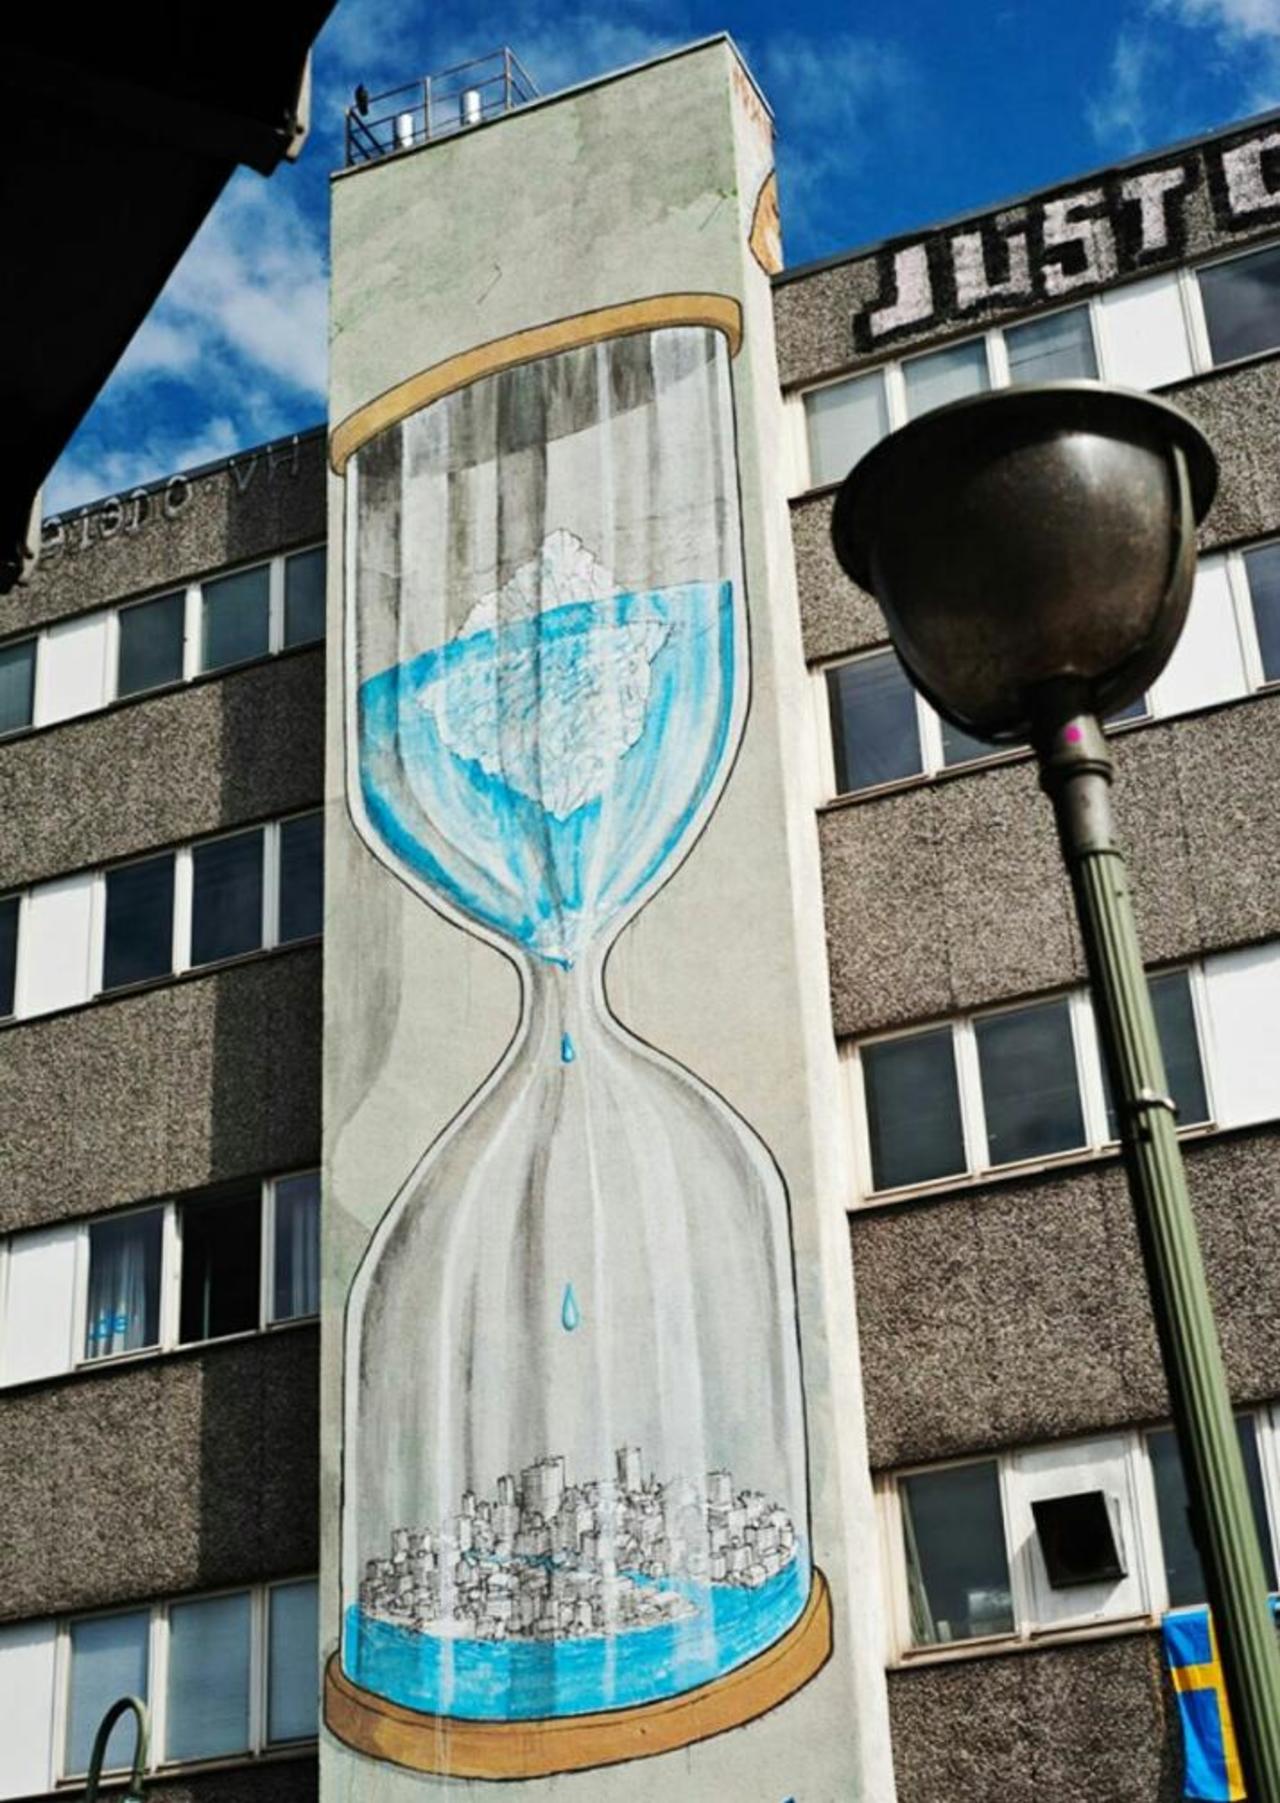 12 Powerful Street Art Images That Confront Climate Change. Check them out: http://bit.ly/Niumeclimate #streetart https://t.co/S5TjFPNuhq